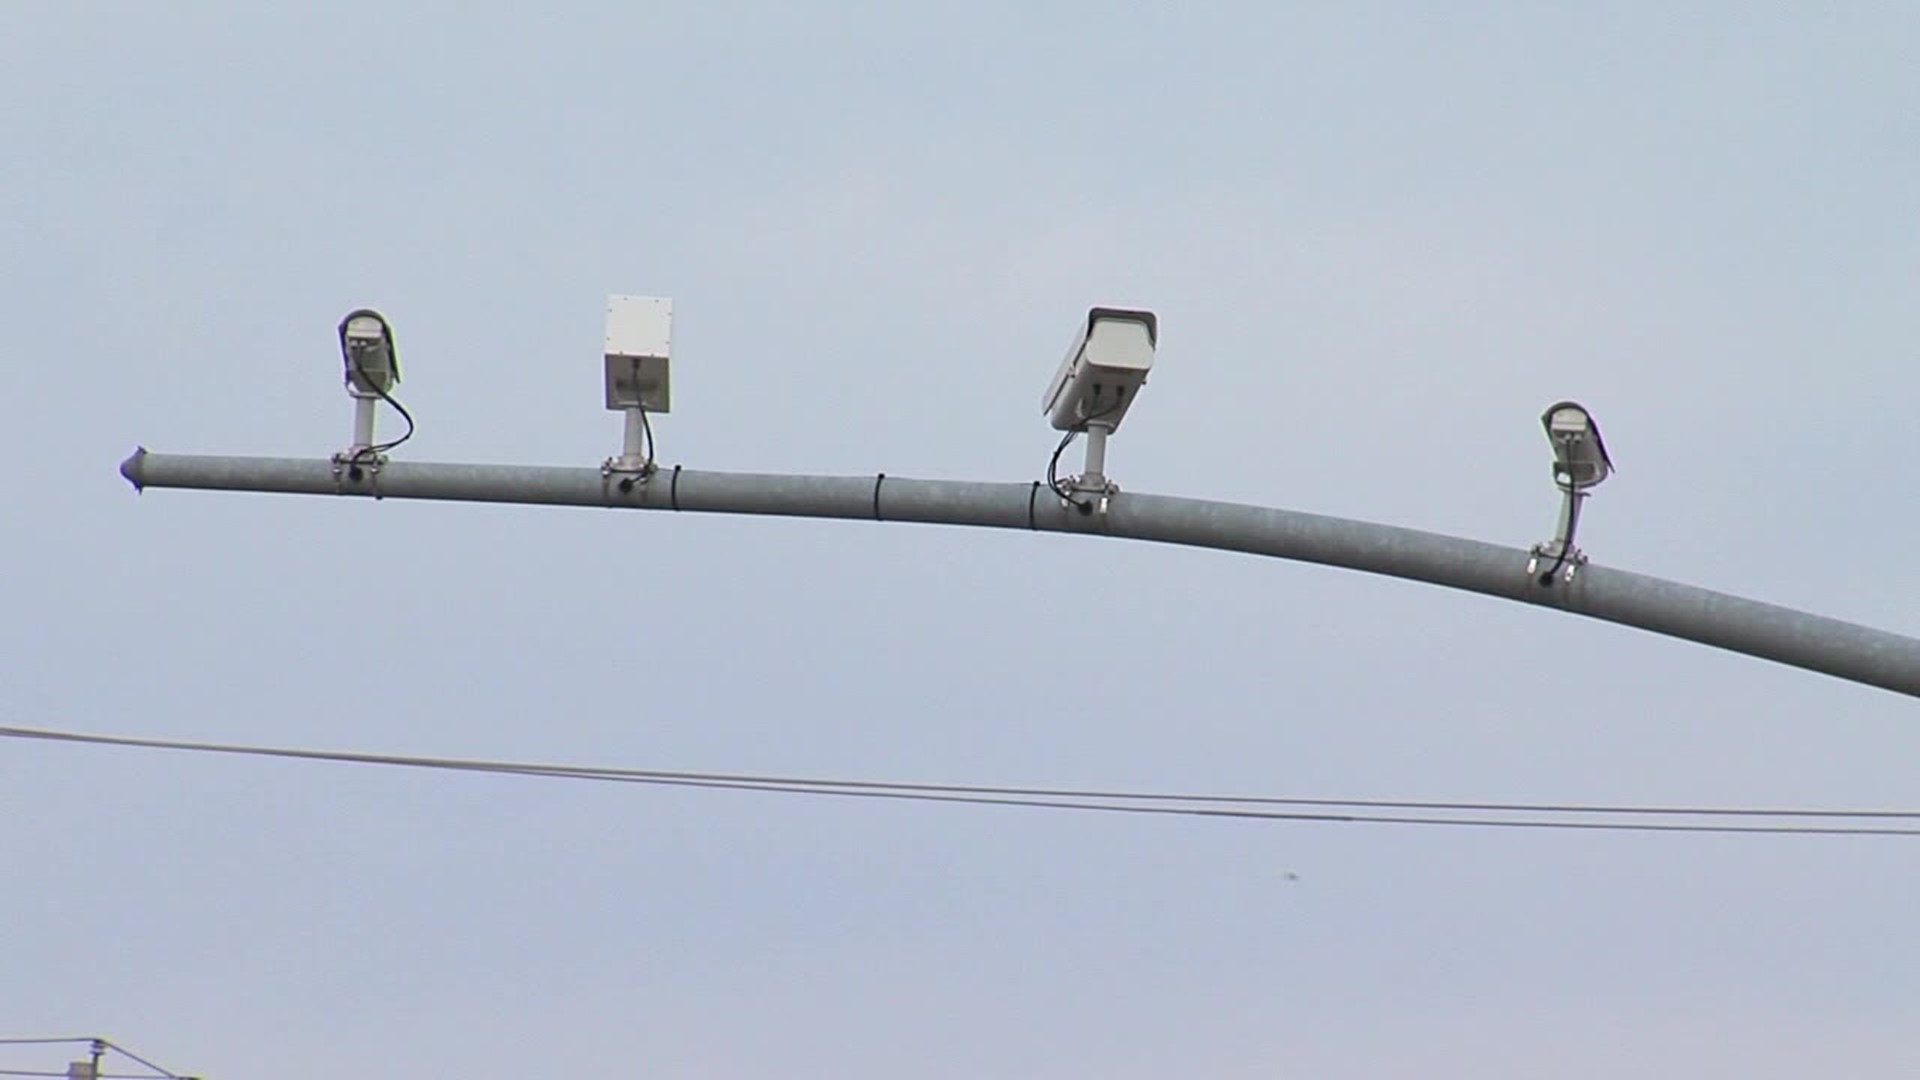 Fines will be given to violators caught by new speed safety cameras